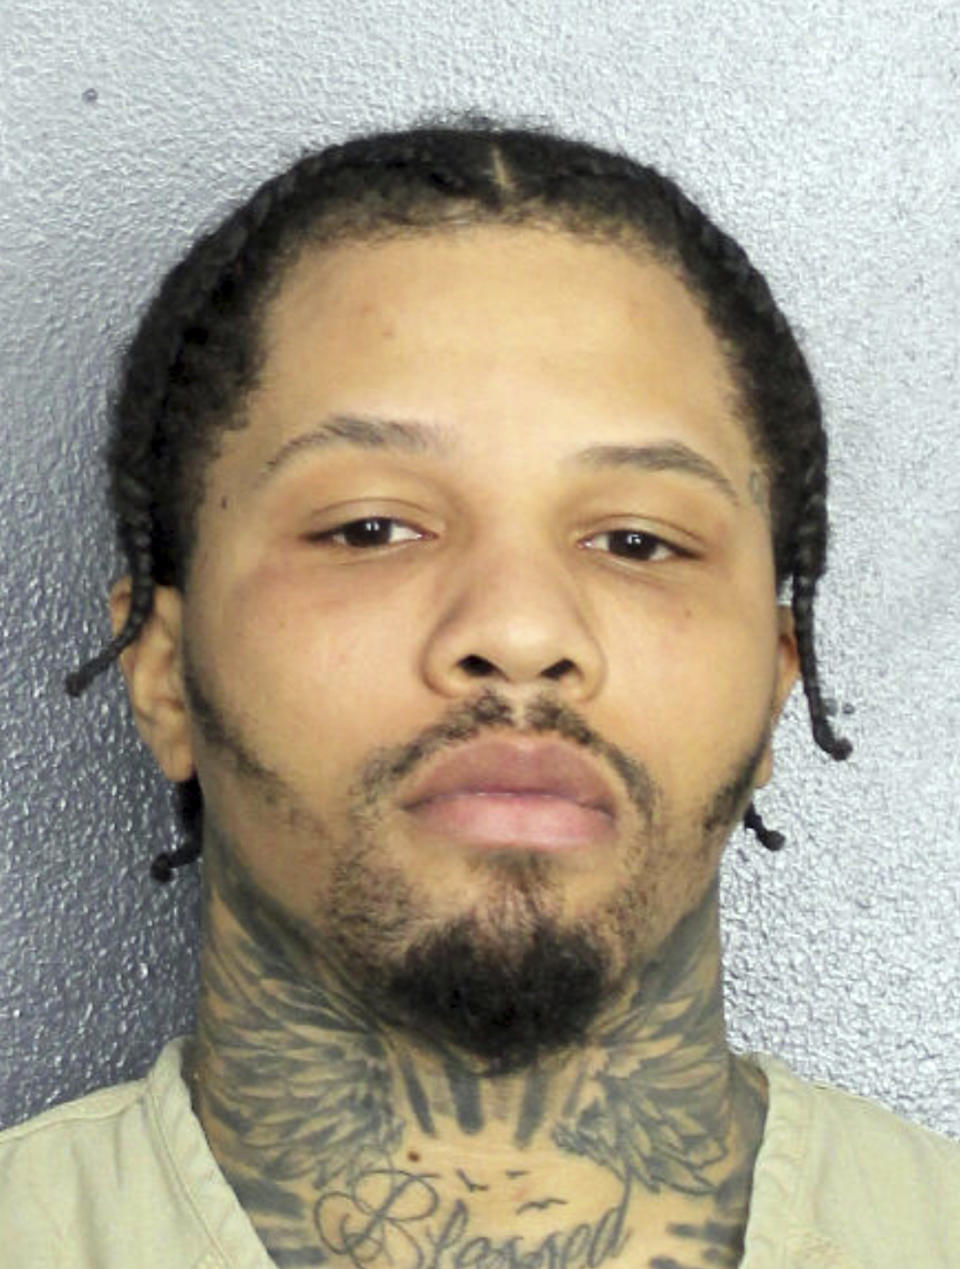 This booking image provided by the Broward County Sheriff's Office shows professional boxer Gervonta Davis, who has been jailed in Florida after he struck a woman in the face, authorities said Wednesday, Dec. 28, 2022. (Broward County Sheriff's Office via AP)